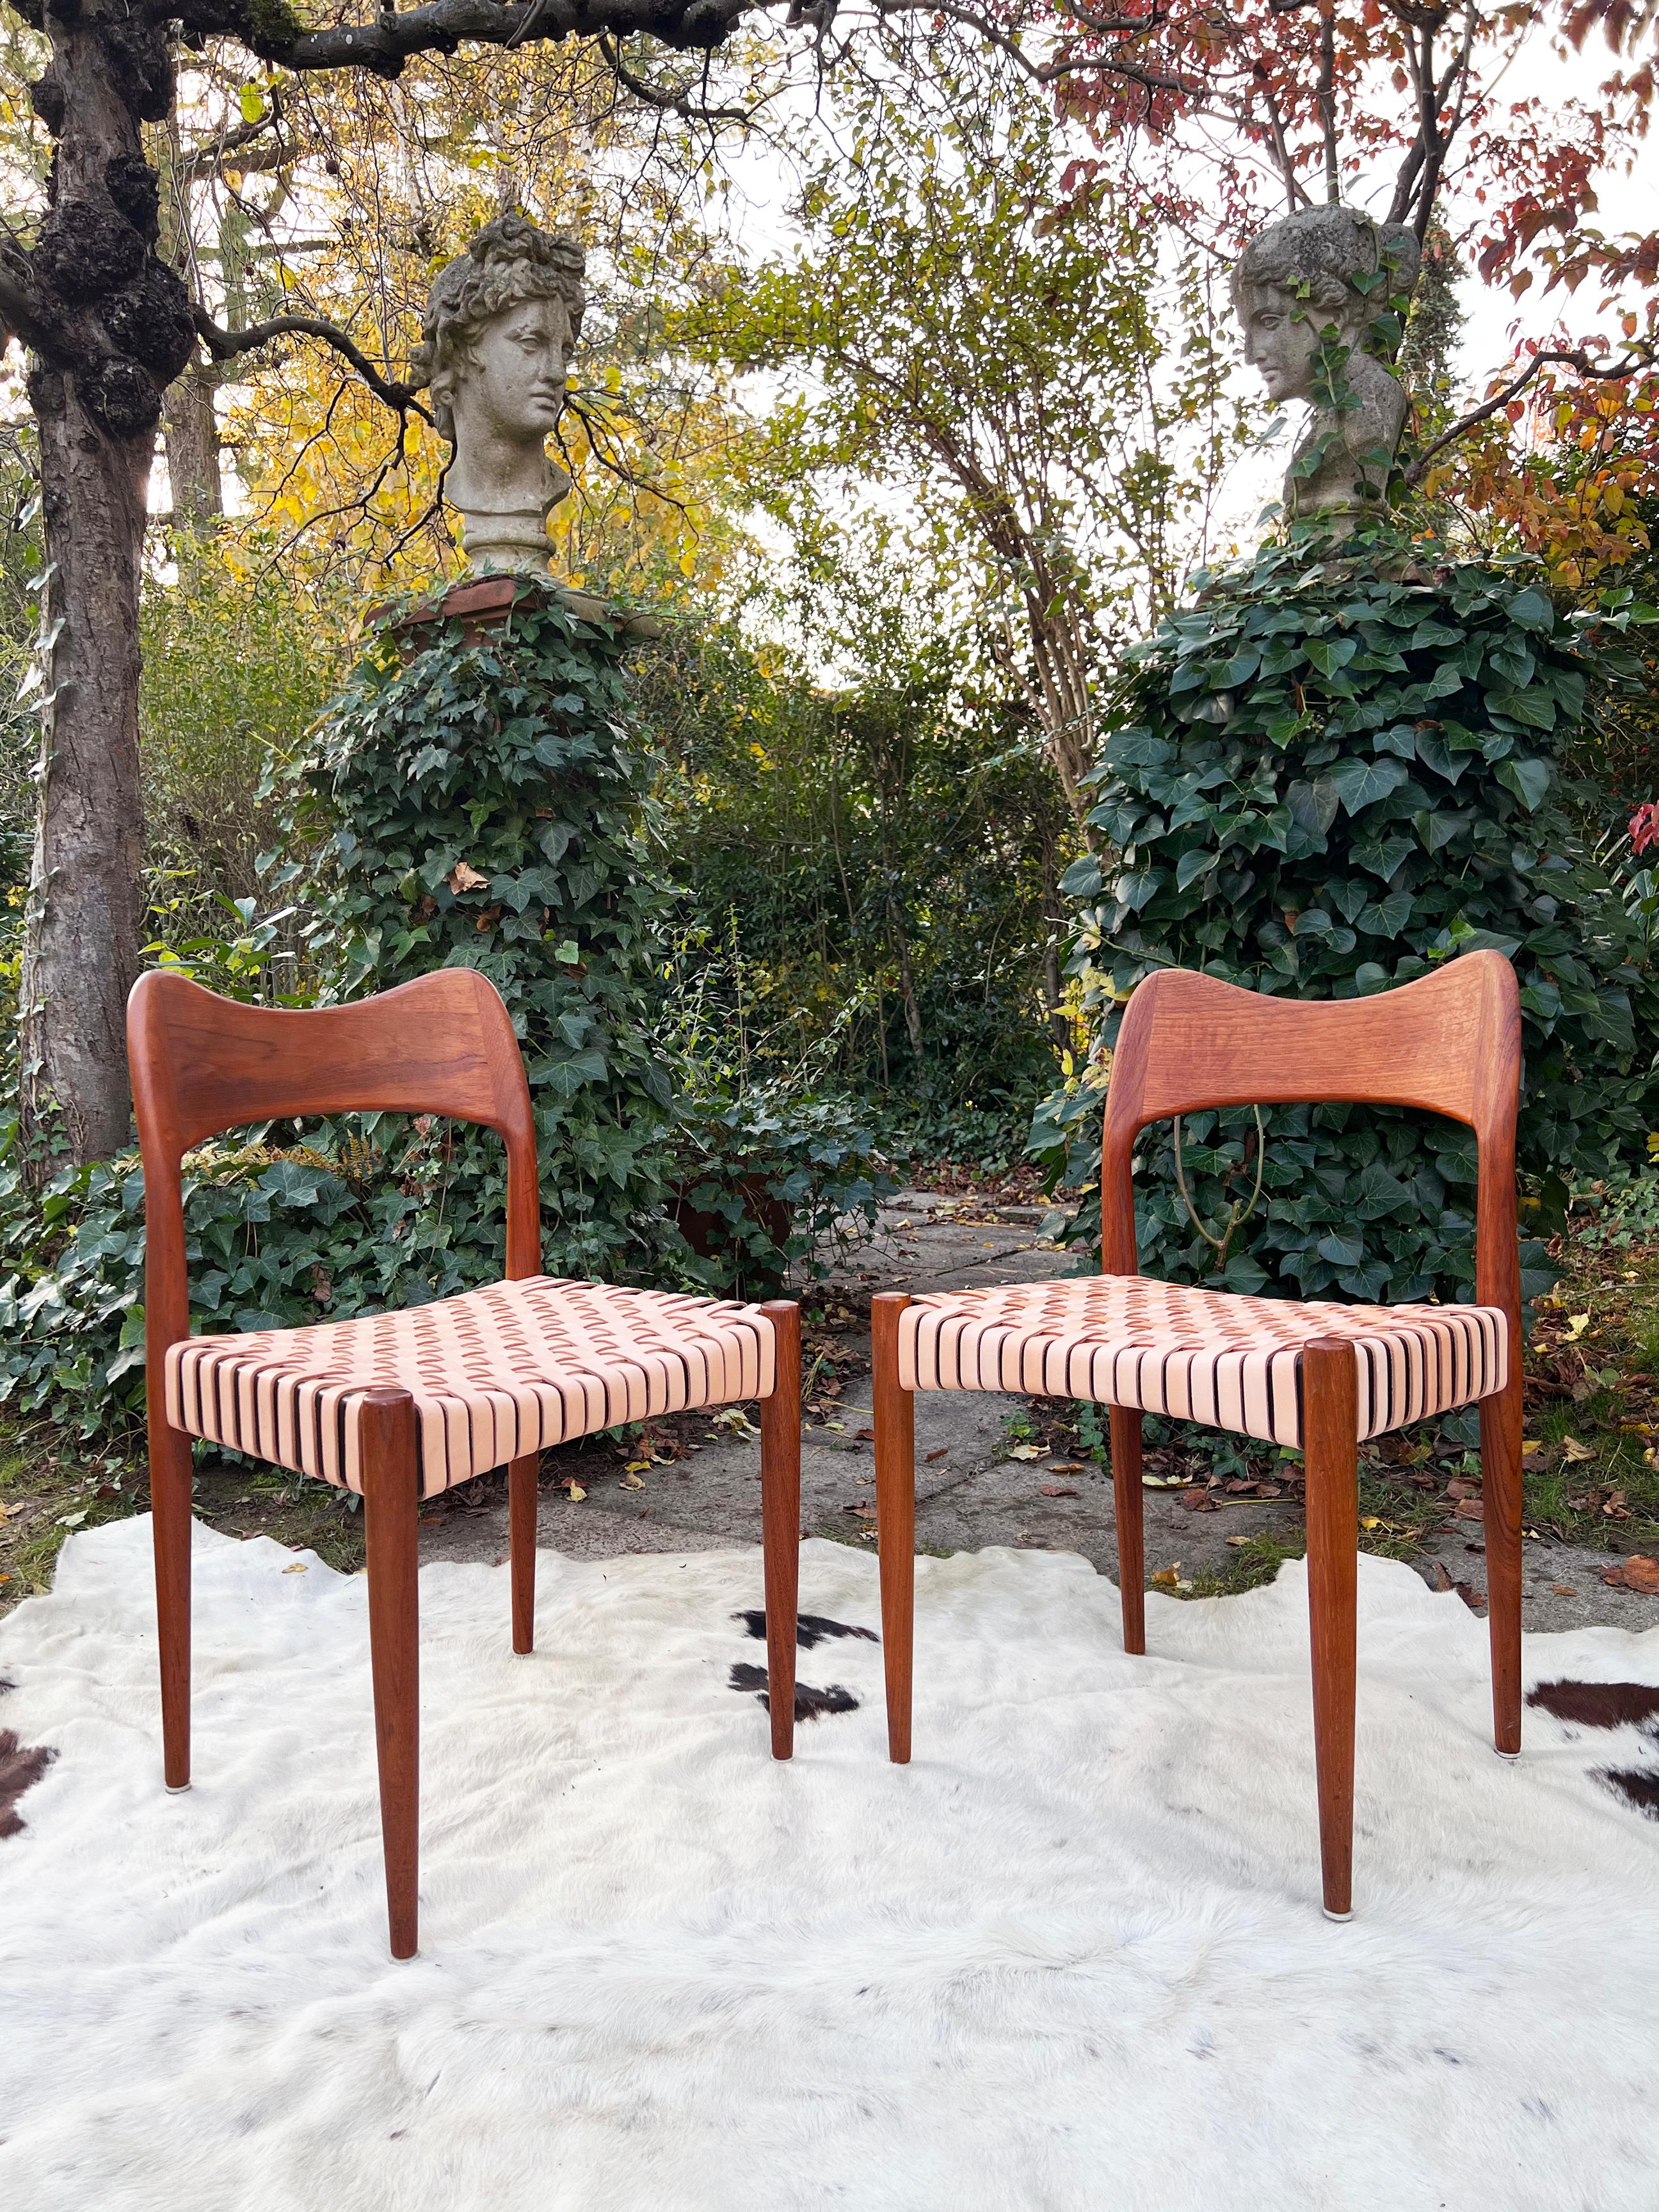 Stunning Vintage Mid Century Teak Chairs by Arne Hovmand Olsen for Mogens Kold, 1960s--Set of 4

These chairs have been completely refurbished, polished and new leather seats have been woven for them. They shine from all angles and they are a